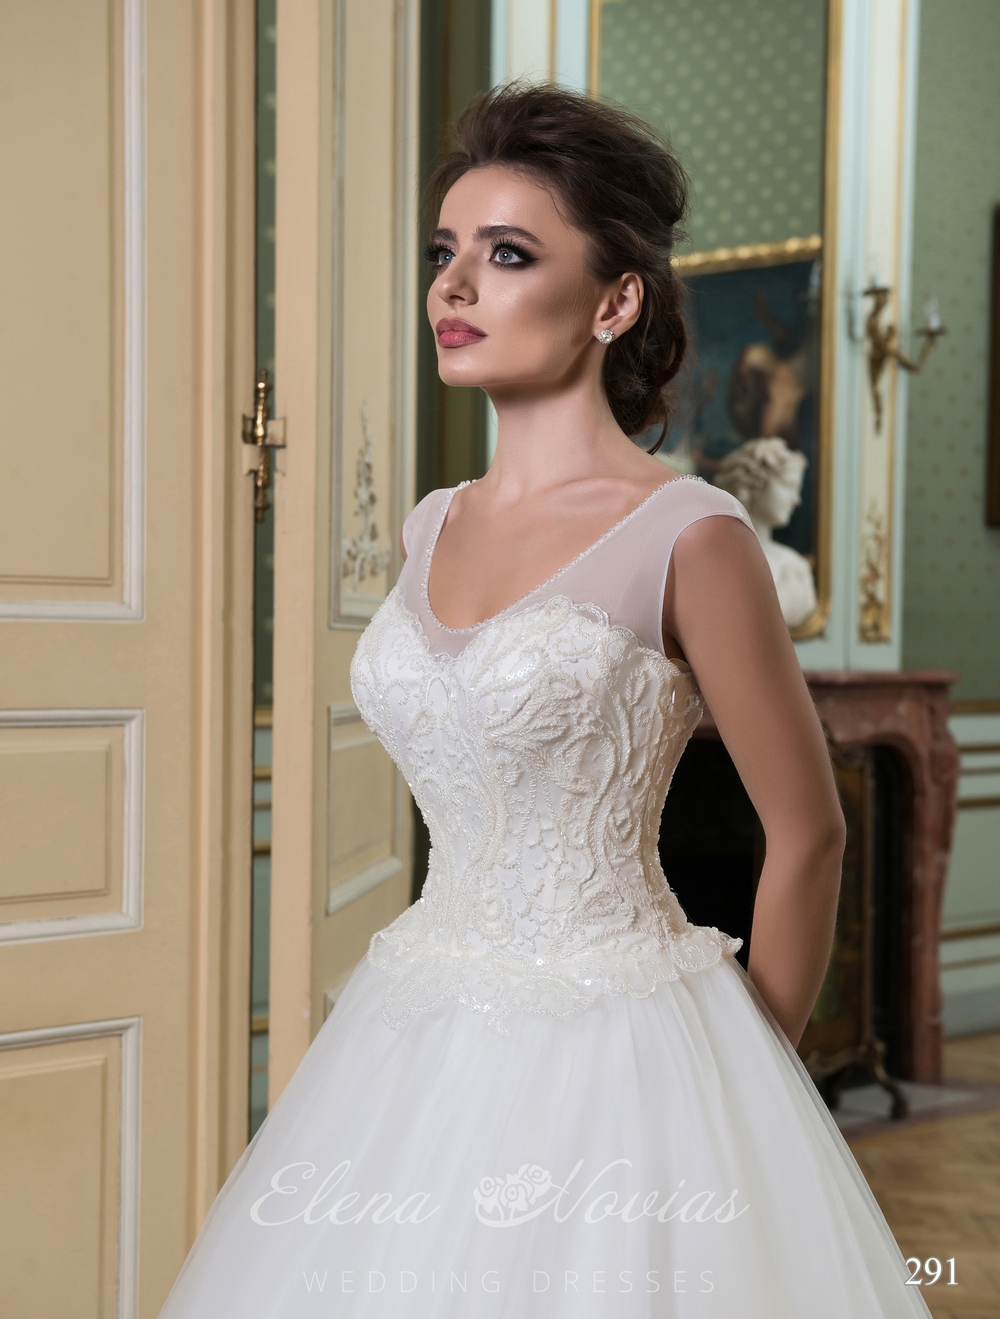 Ball wedding gown with a tight corset